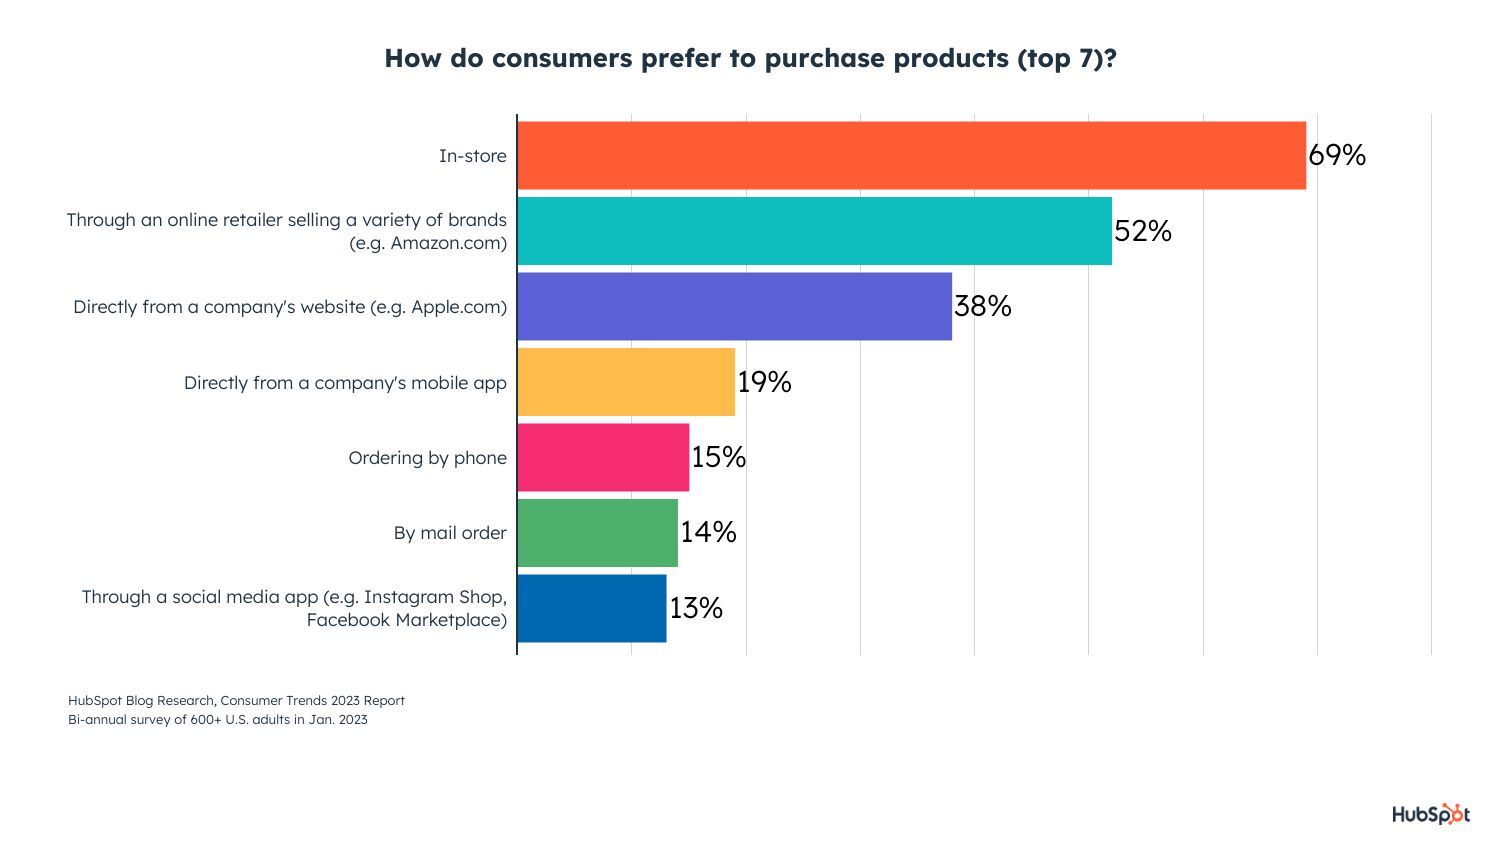 consumer trends article updates%20(1) min.jpg?width=1500&height=844&name=consumer trends article updates%20(1) min - The State of Consumer Trends [How Data from 600+ Consumers Shifted Since 2022]